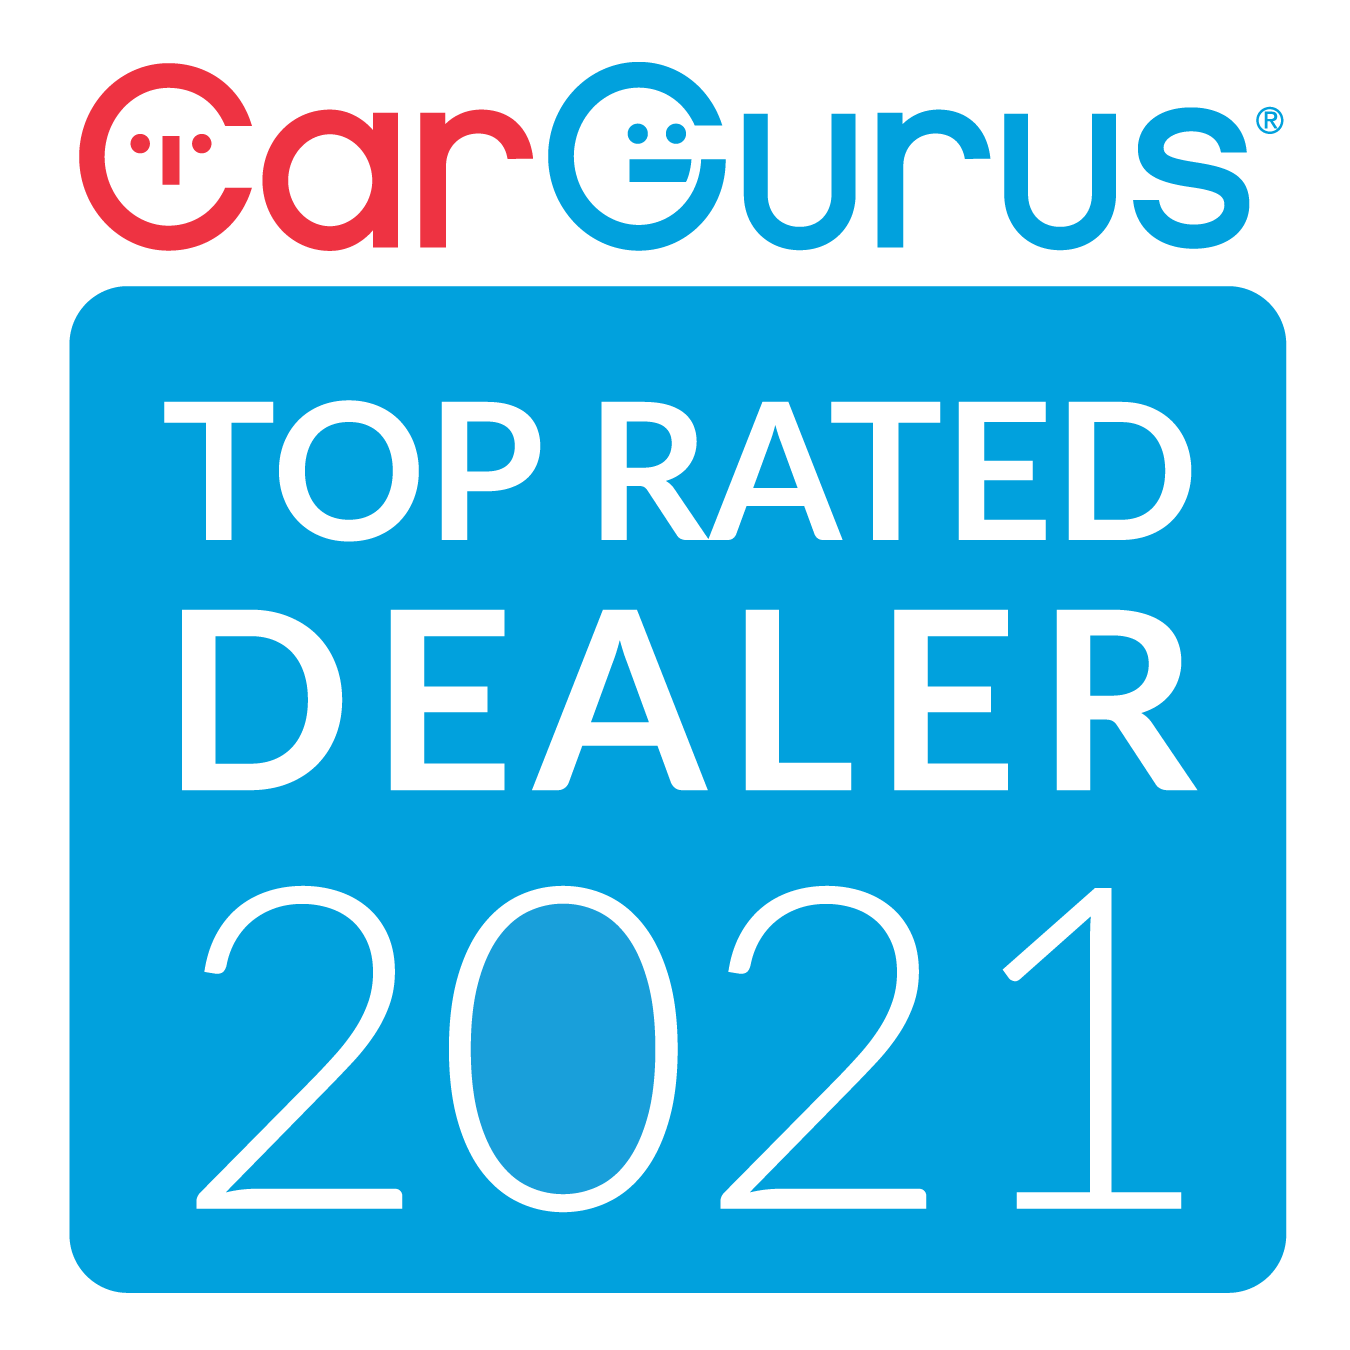 award from Cargurus 2021 top rated dealer